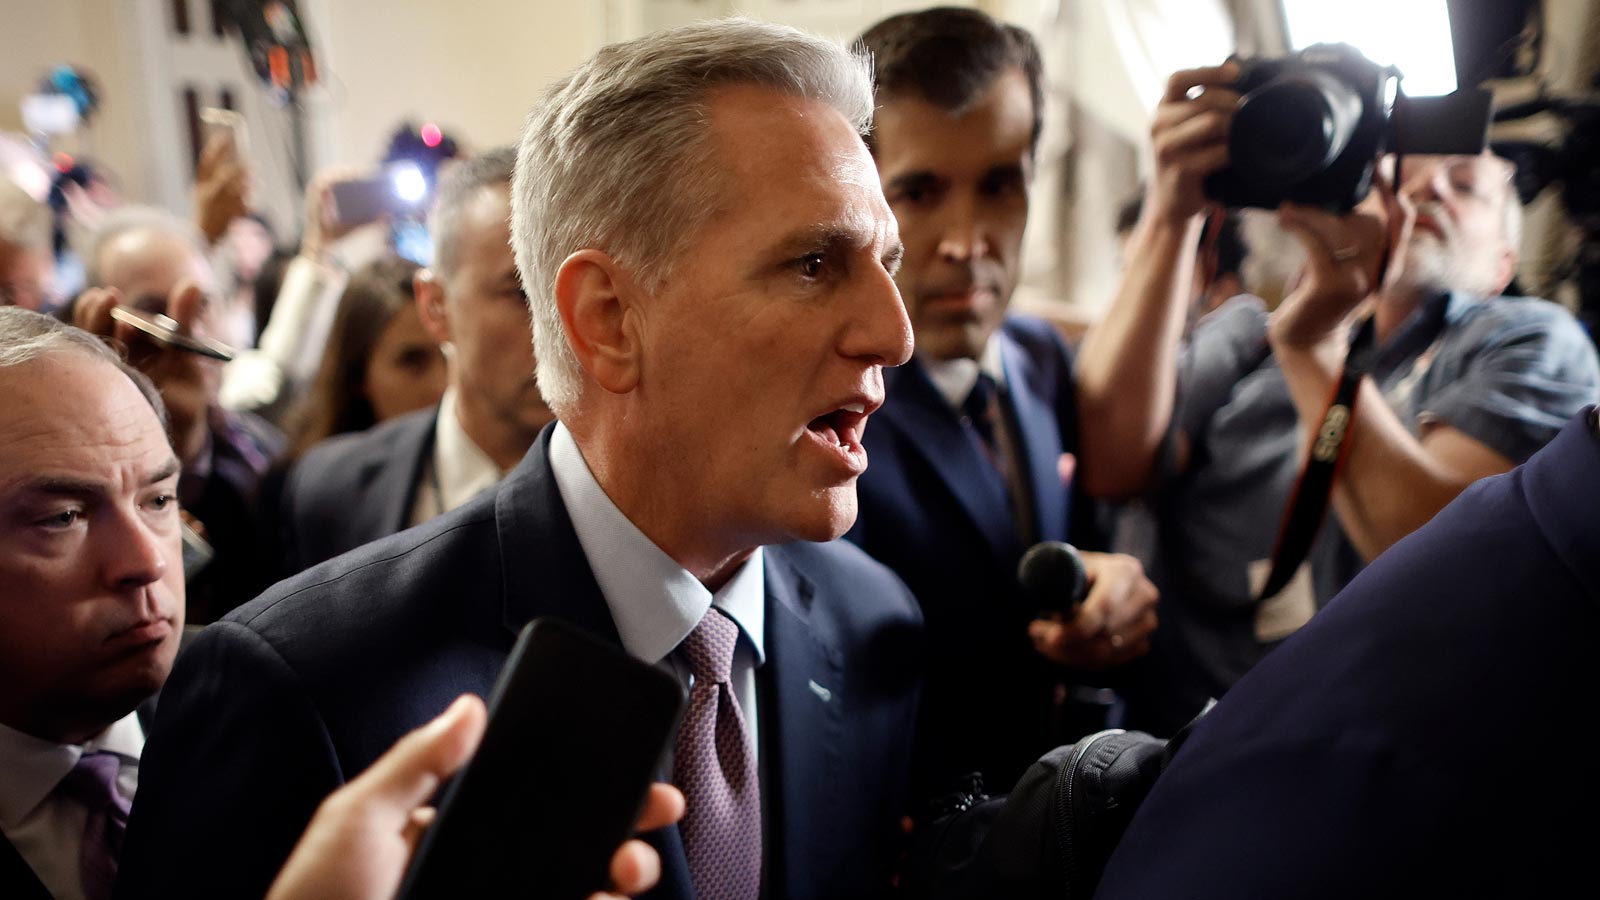 House Speaker Kevin McCarthy is surrounded by staff, security and journalists as he walks to the Ho...